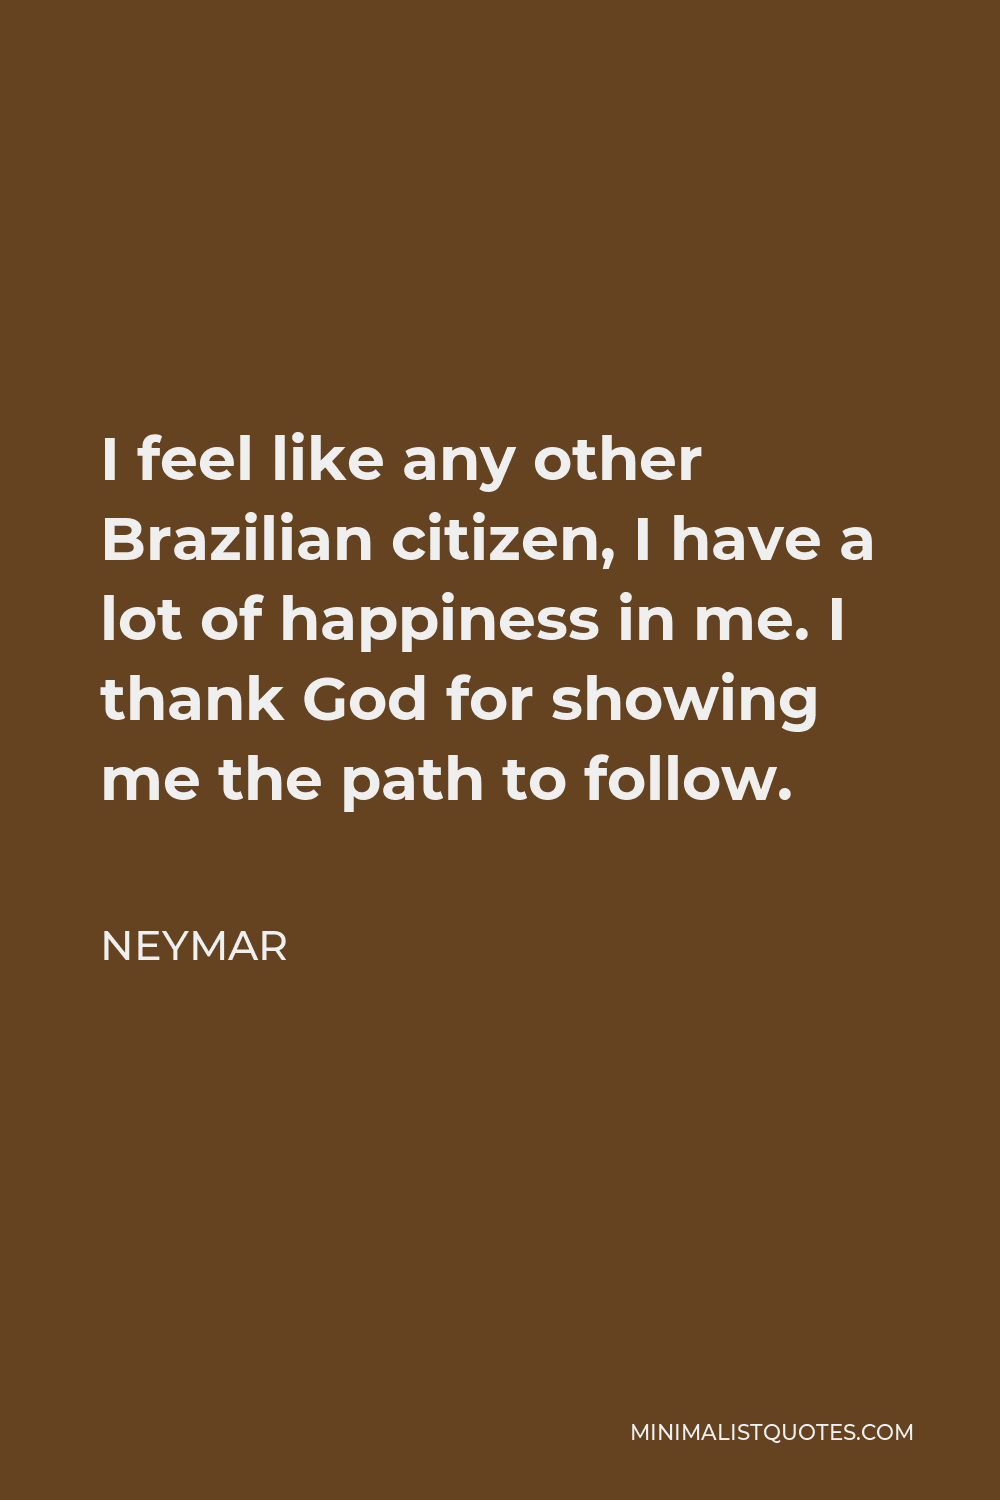 Neymar Quote - I feel like any other Brazilian citizen, I have a lot of happiness in me. I thank God for showing me the path to follow.